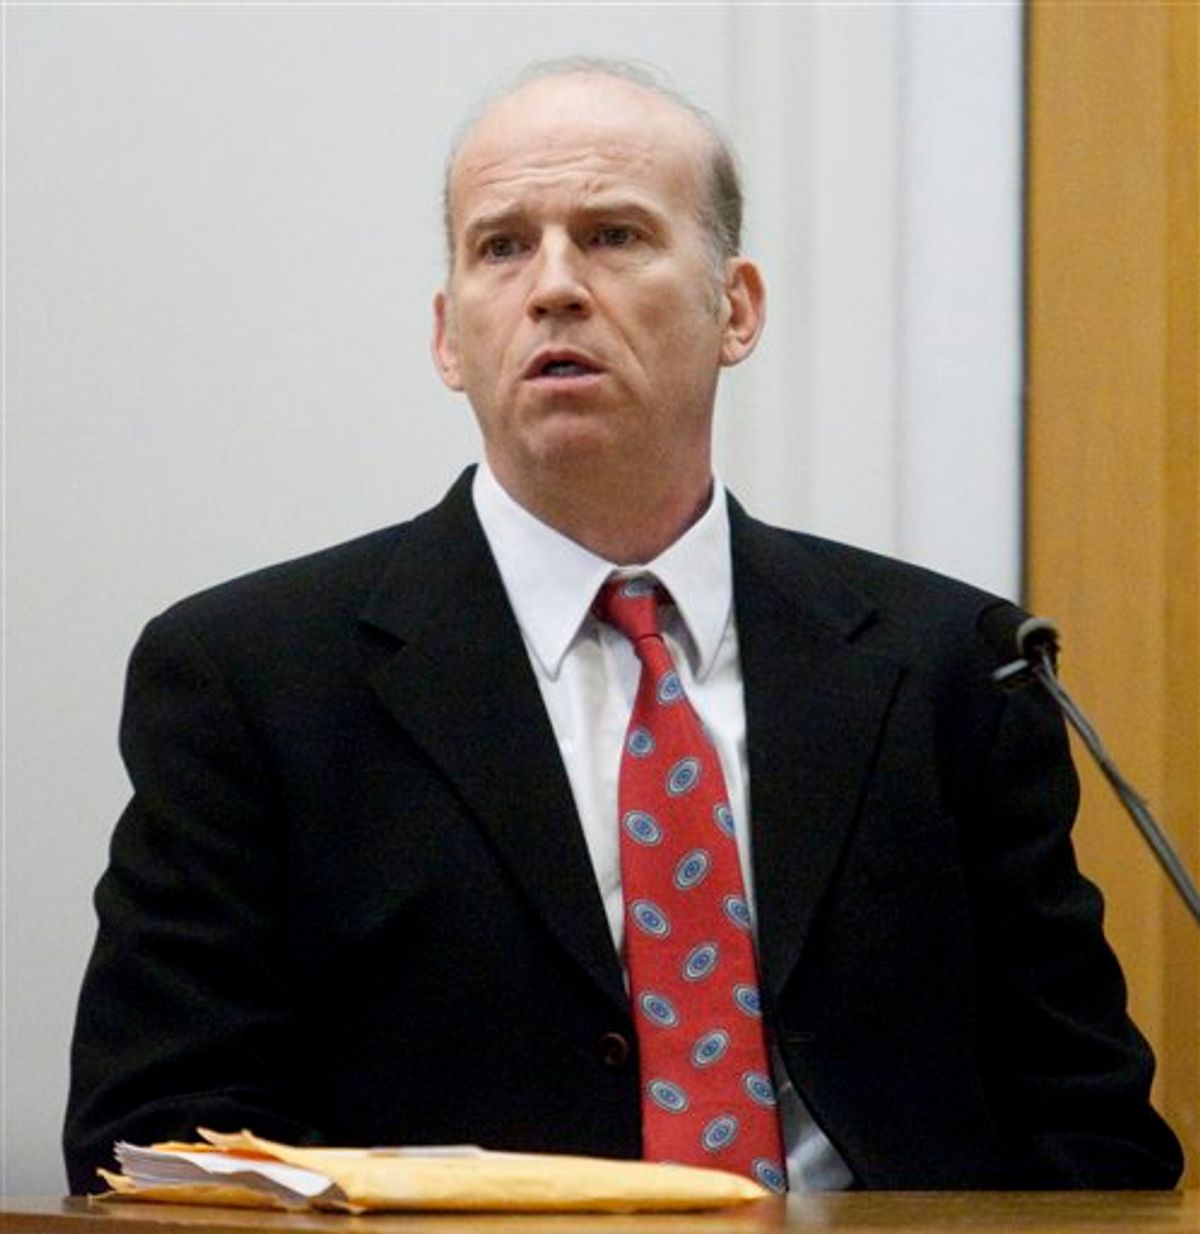 Scott Roeder, accused of murdering prominent Kansas abortion provider Dr. George Tiller,  testifies at his trial on Thursday Jan. 28, 2010 in Wichita, Kansas. Roeder testified  that he killed Tiller in the foyer of Tiller's Wichita church on May 31. The 51-year-old Roeder also said he believes abortion is murder. (AP Photo/Jeff Tuttle, Pool)  (AP)